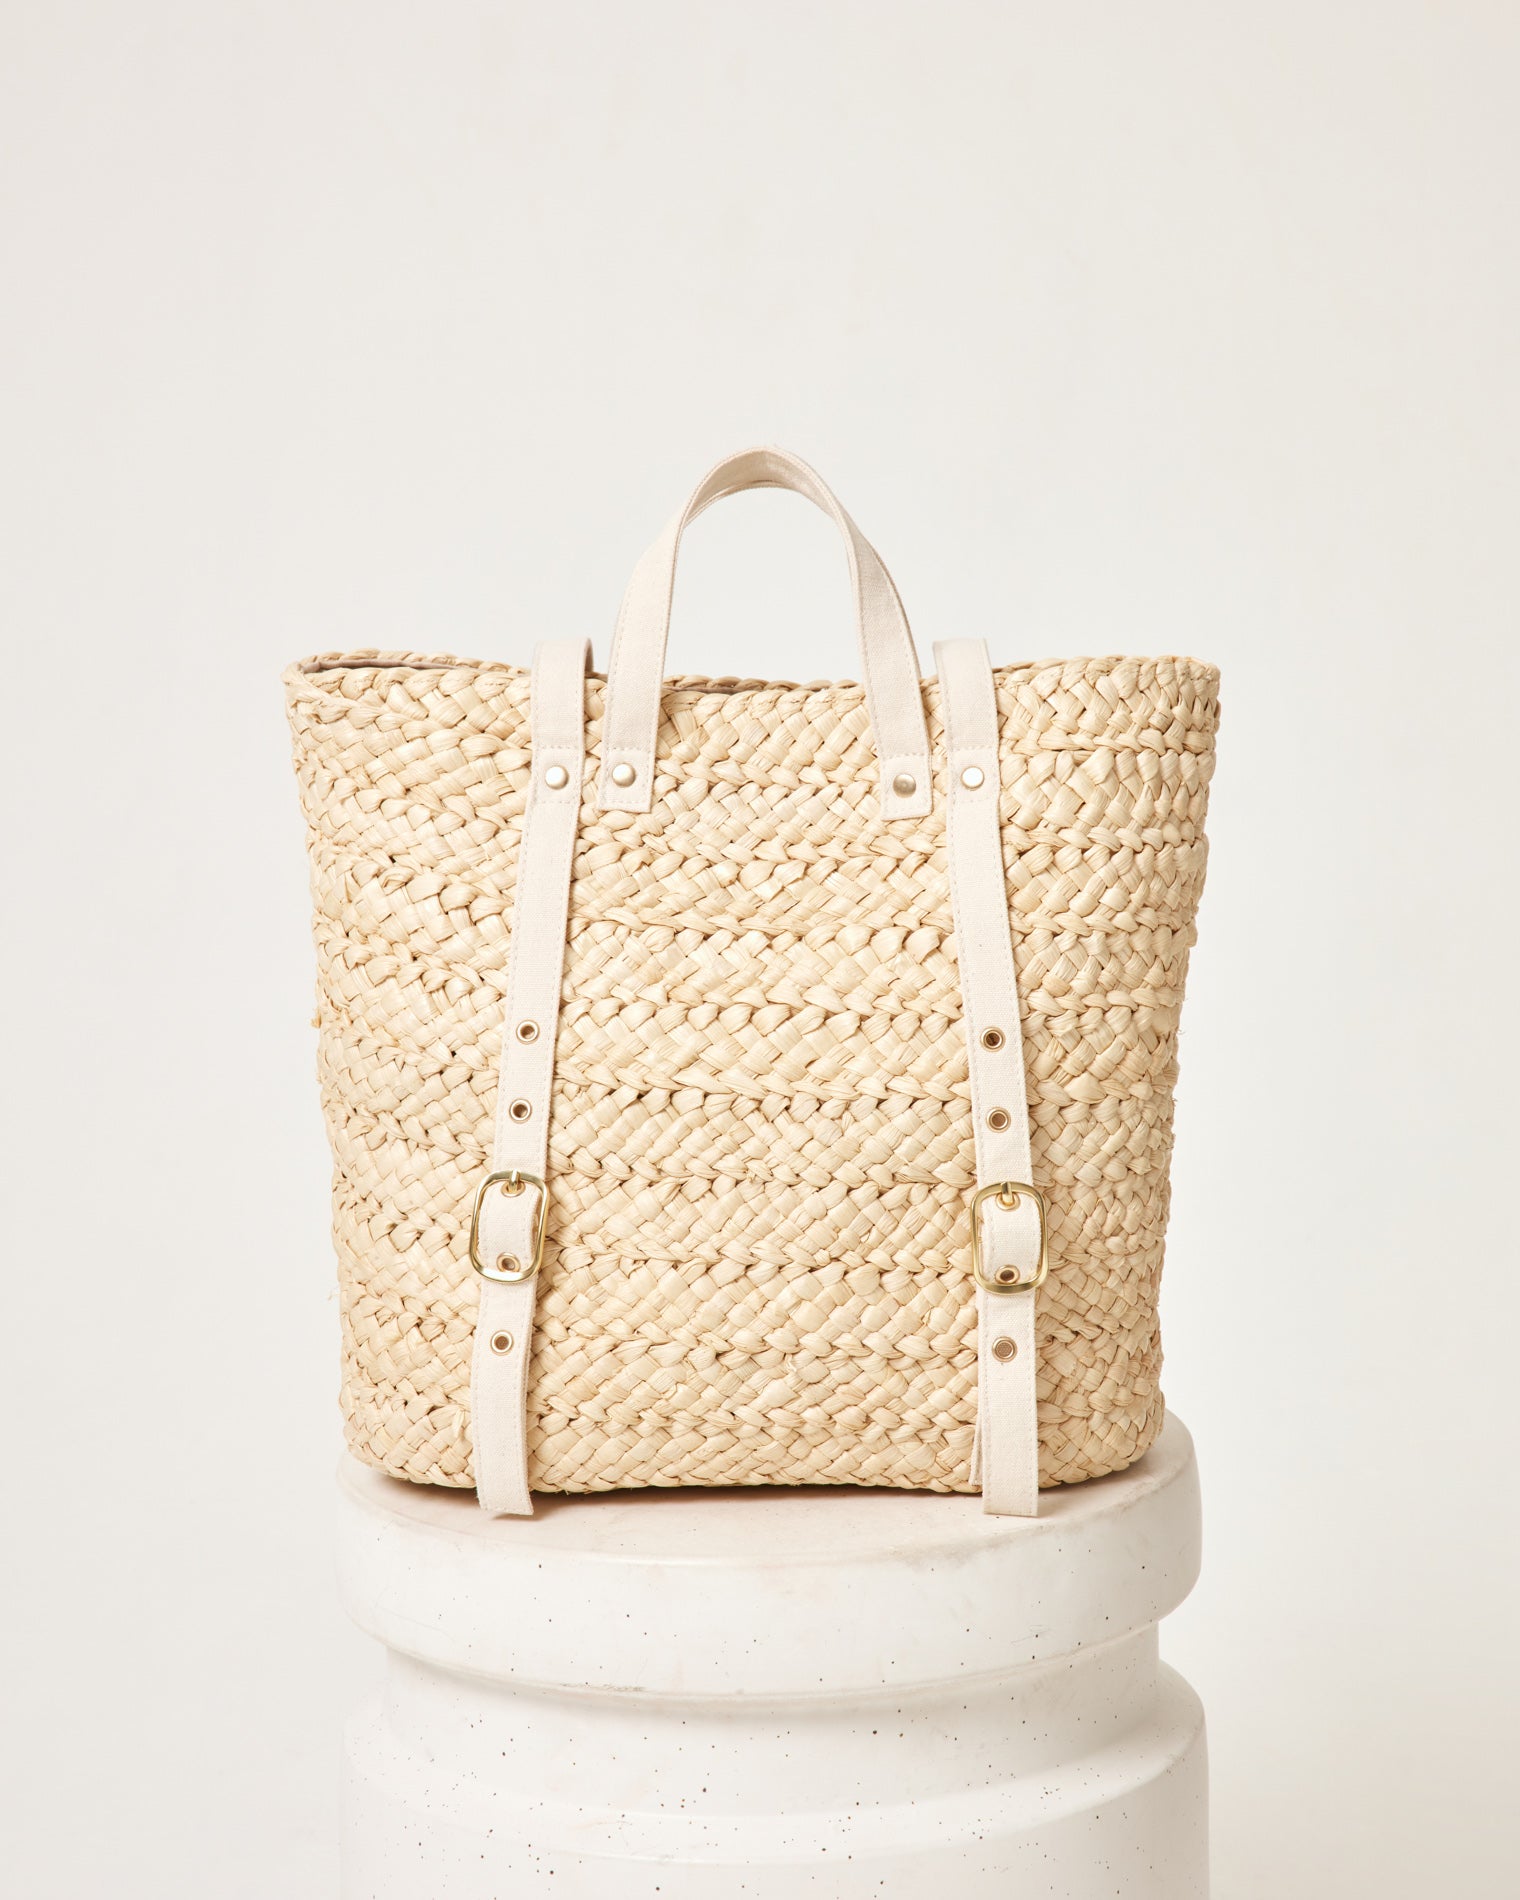 The Perfect Striped Straw Tote for Summer